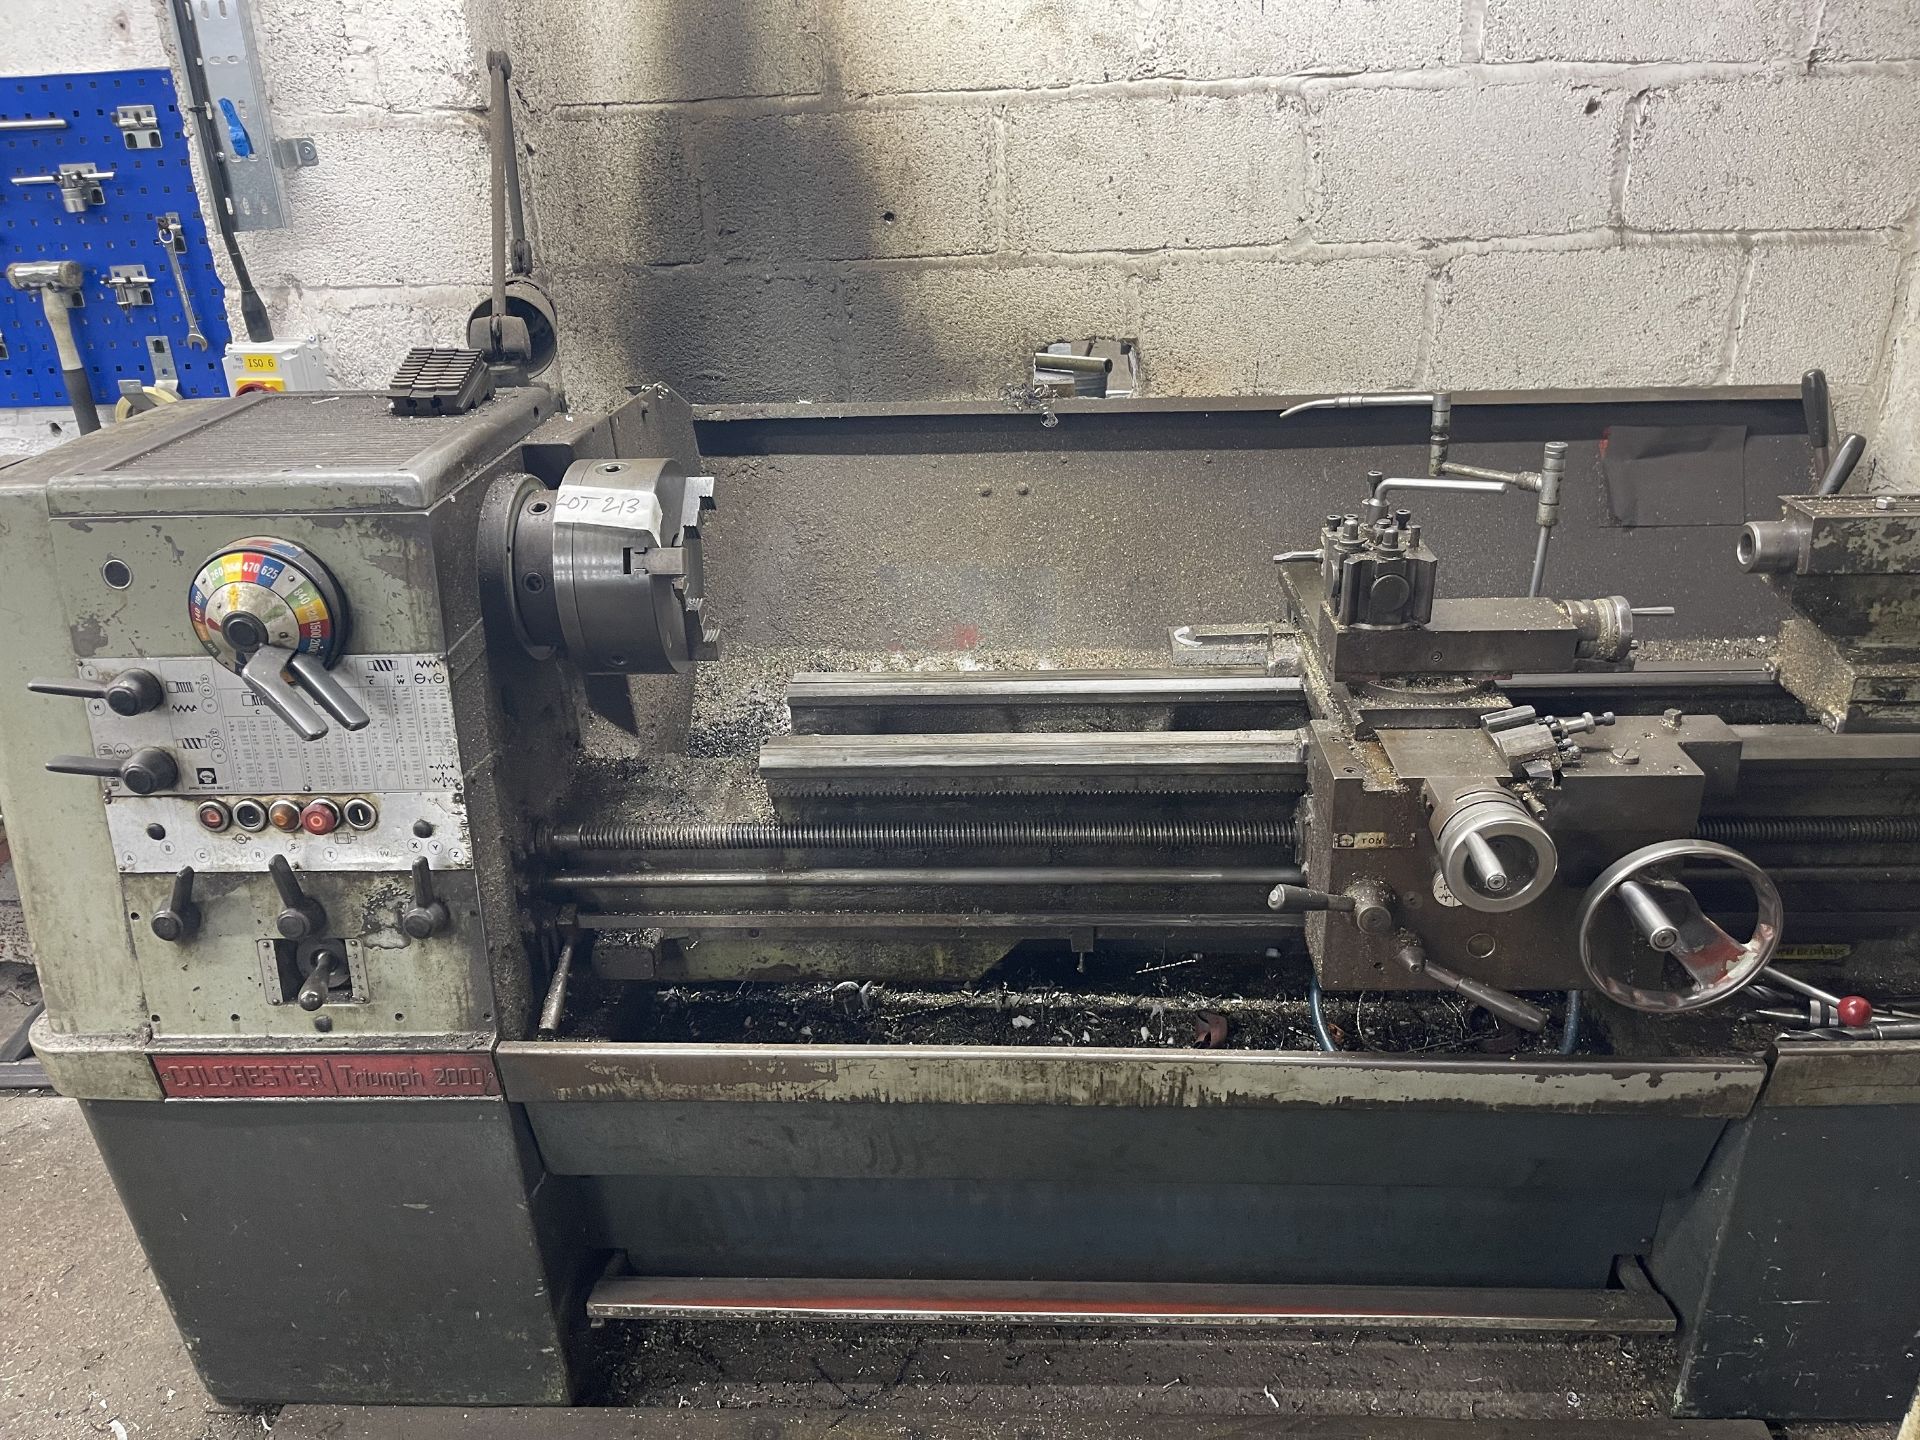 Colchester Triumph 2000 GAP BED LATHE, taper turning, 3 and 4 jaw chucks, approx 1250mm bc, serial